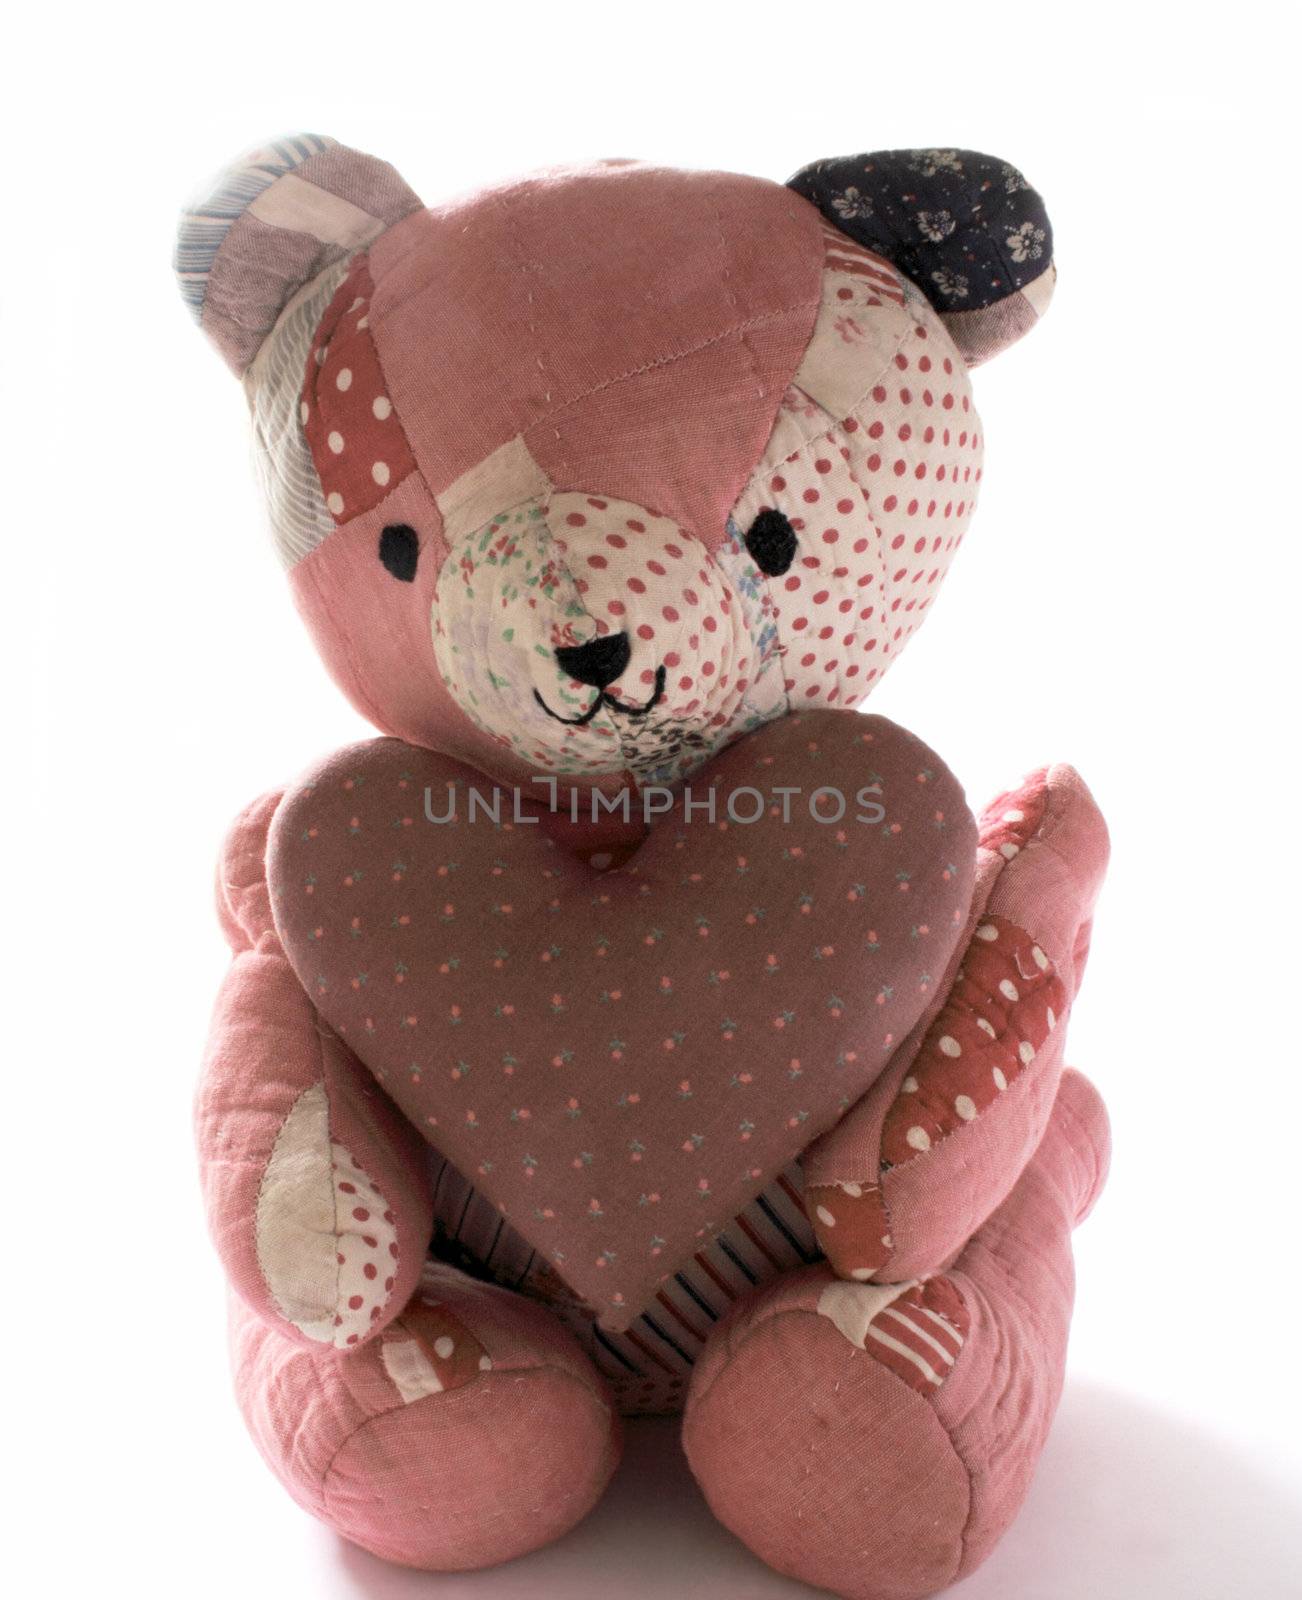 teddy bear made from antique quilts holding a large mauve calico heart
